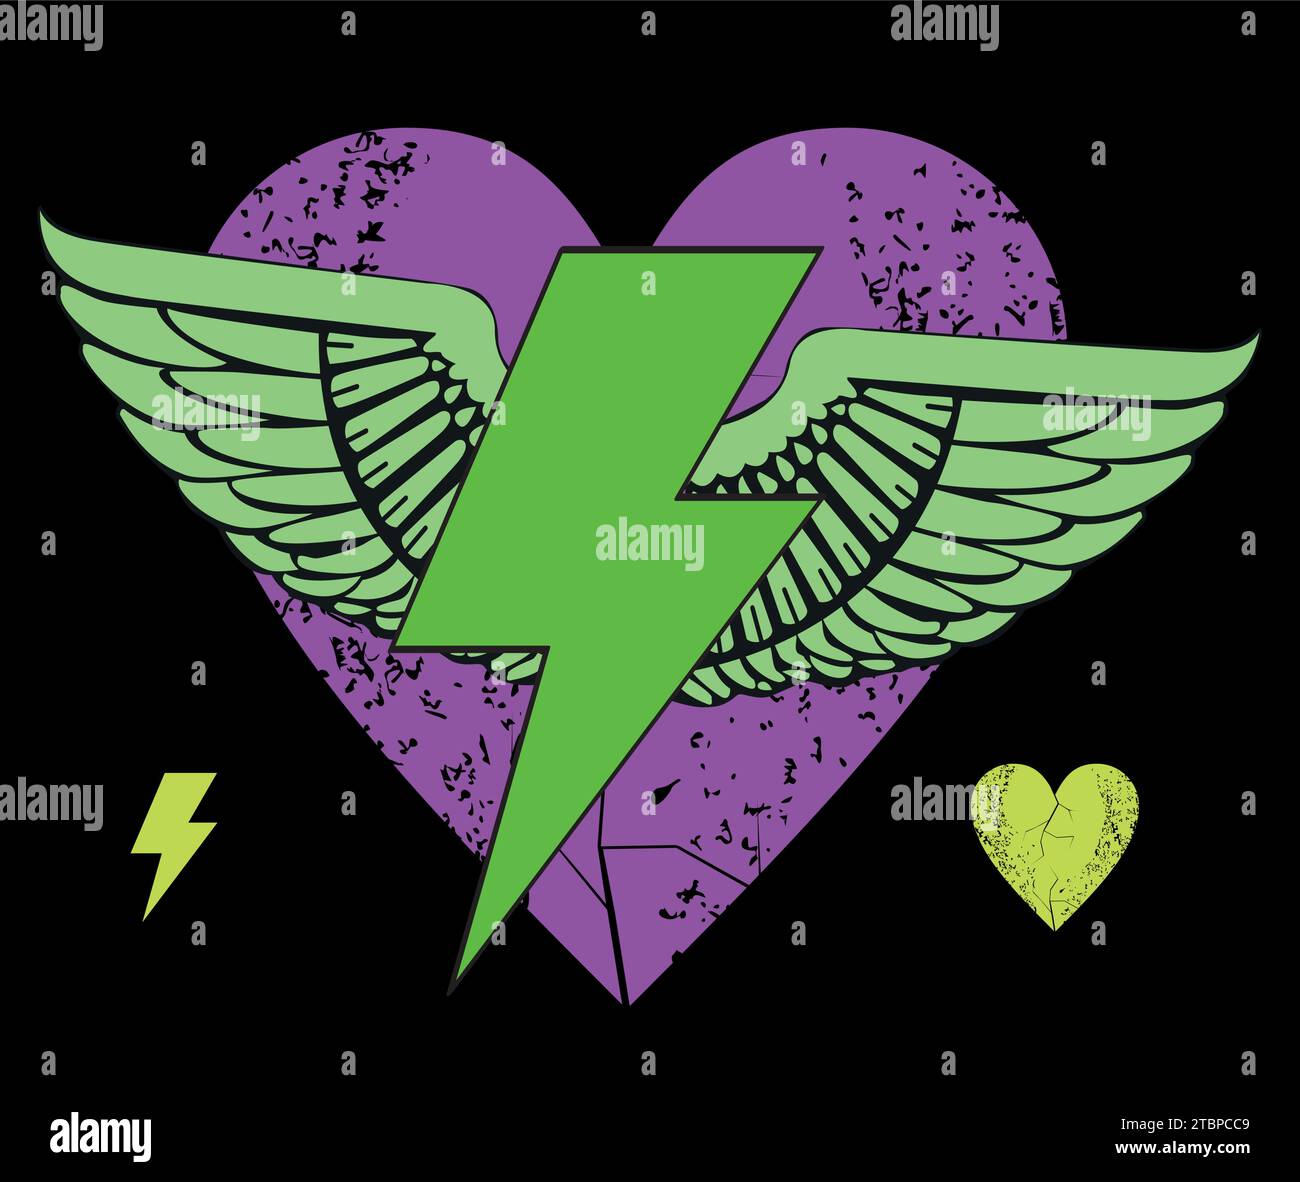 T-shirt design of the thunderbolt symbol with wings over a violet heart ...